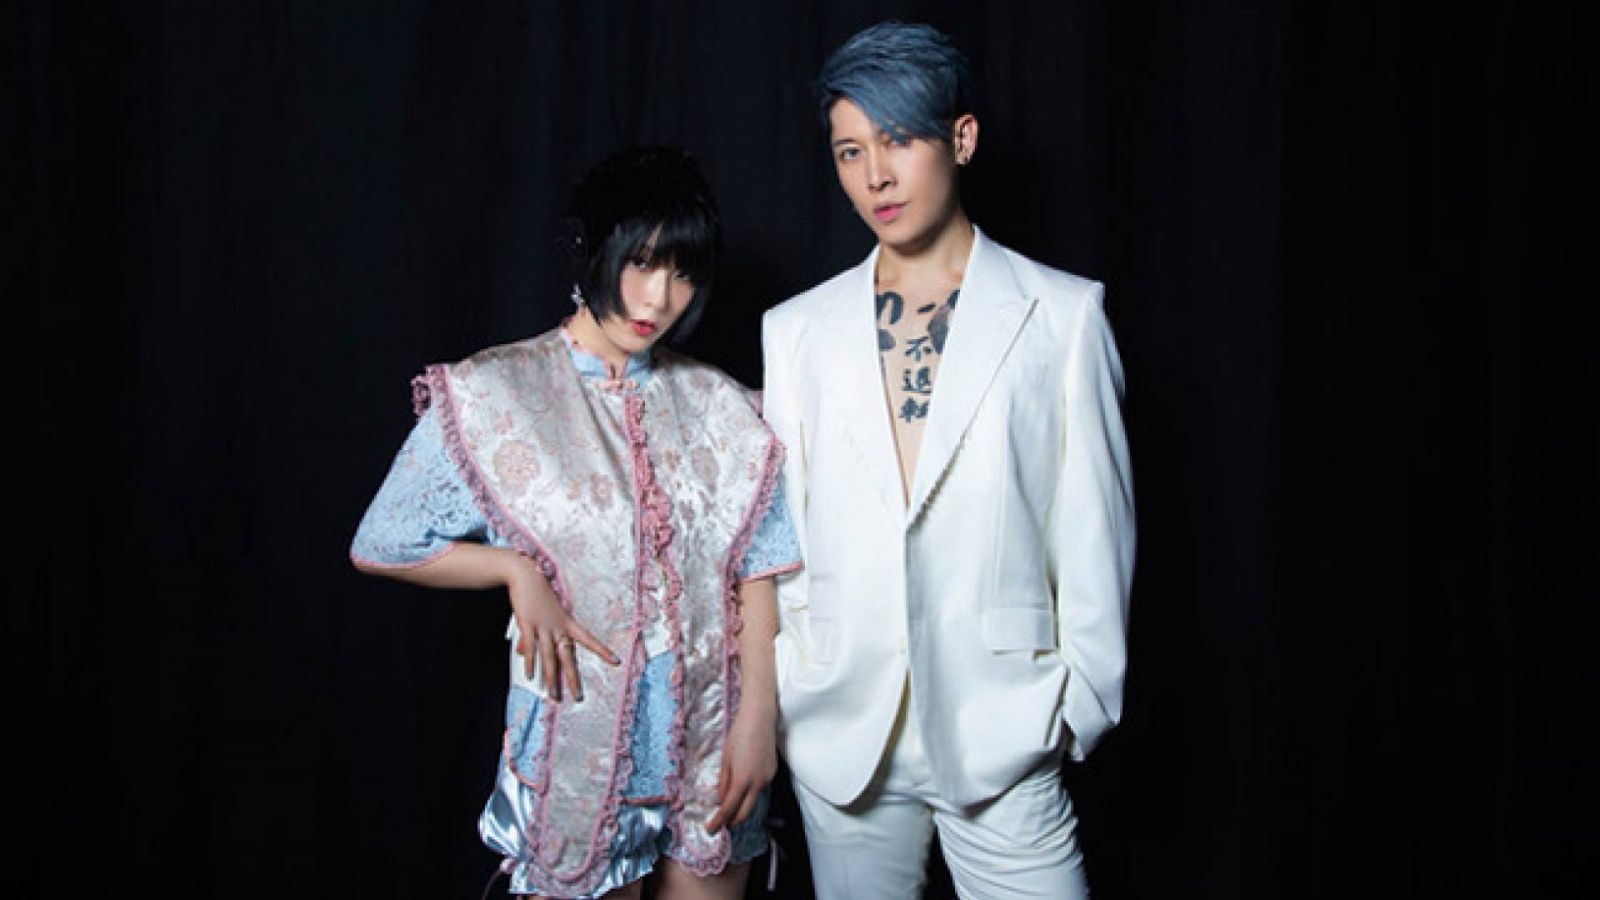 DAOKO and MIYAVI Collaborate for "Diner" Theme Song © DAOKO x MIYAVI. All rights reserved.